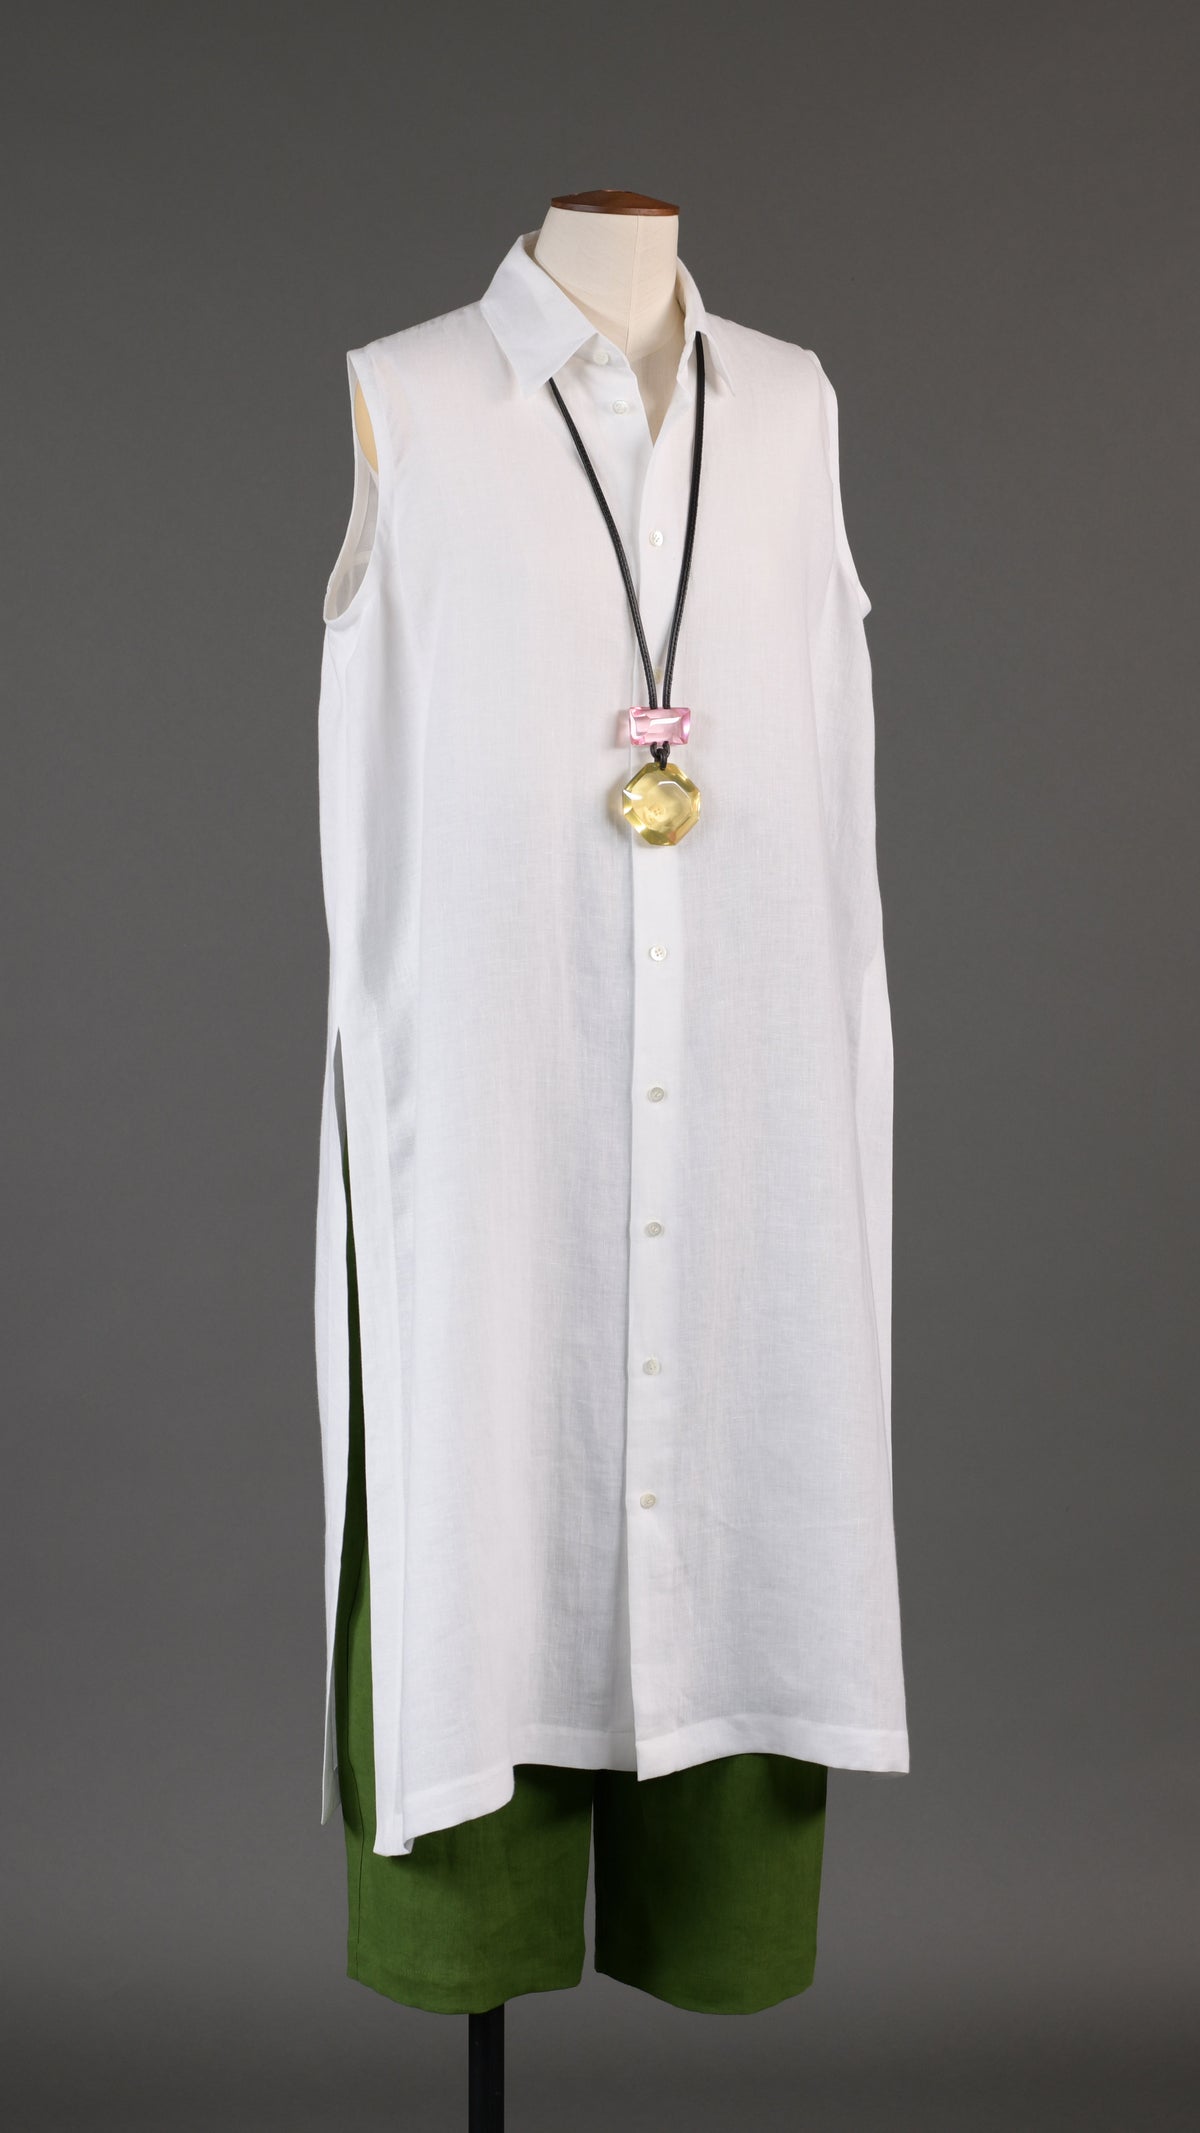 slim a-line sleeveless shirt dress with collar and side slit detail in white